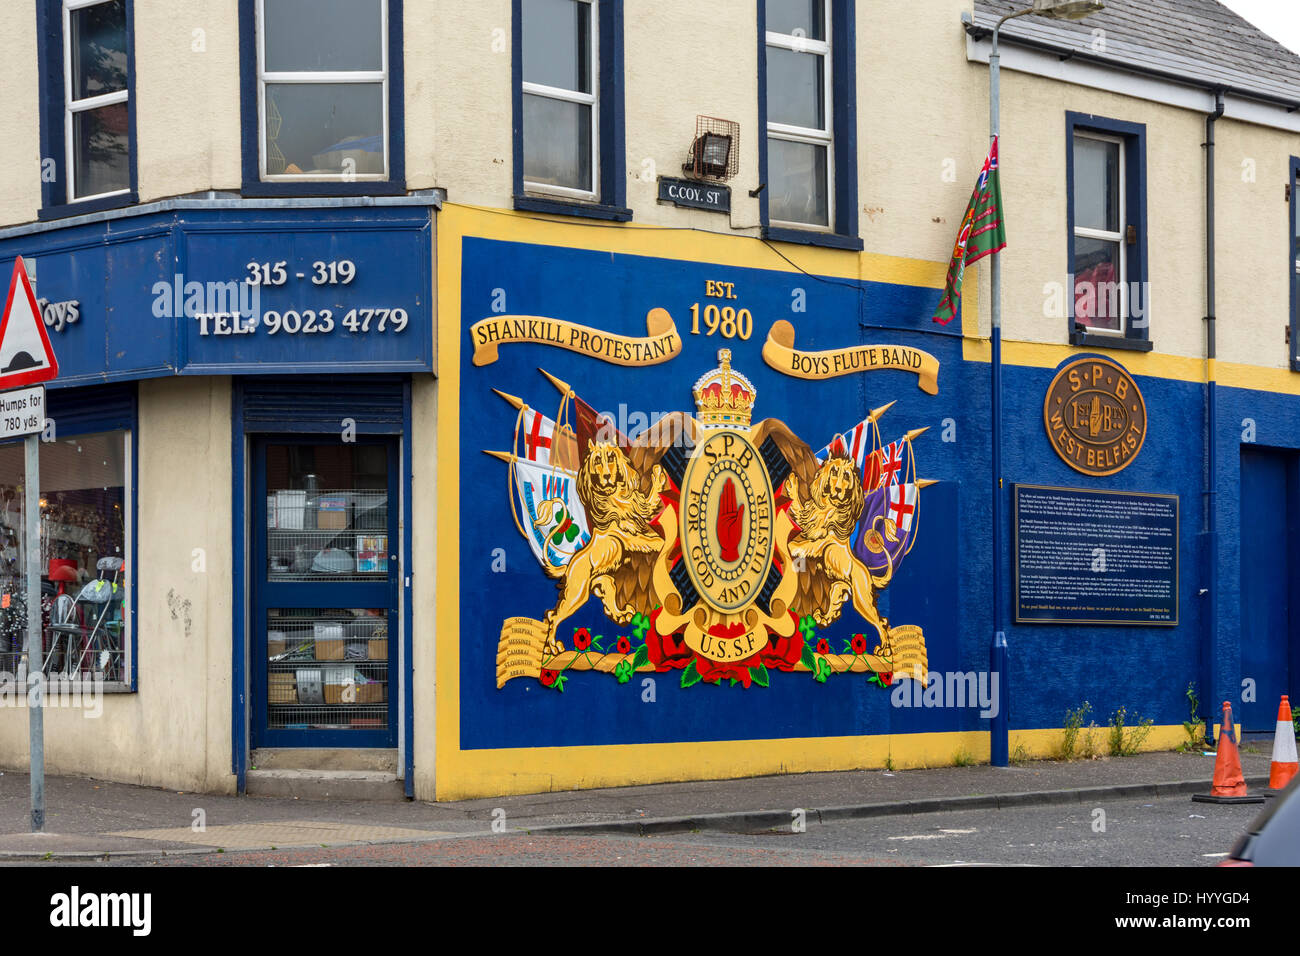 Shankill Protestant Boys Flute Band and Ulster Special Service Force mural, C.Coy St., off Shankill Rd., Belfast, County Antrim, Northern Ireland, UK Stock Photo